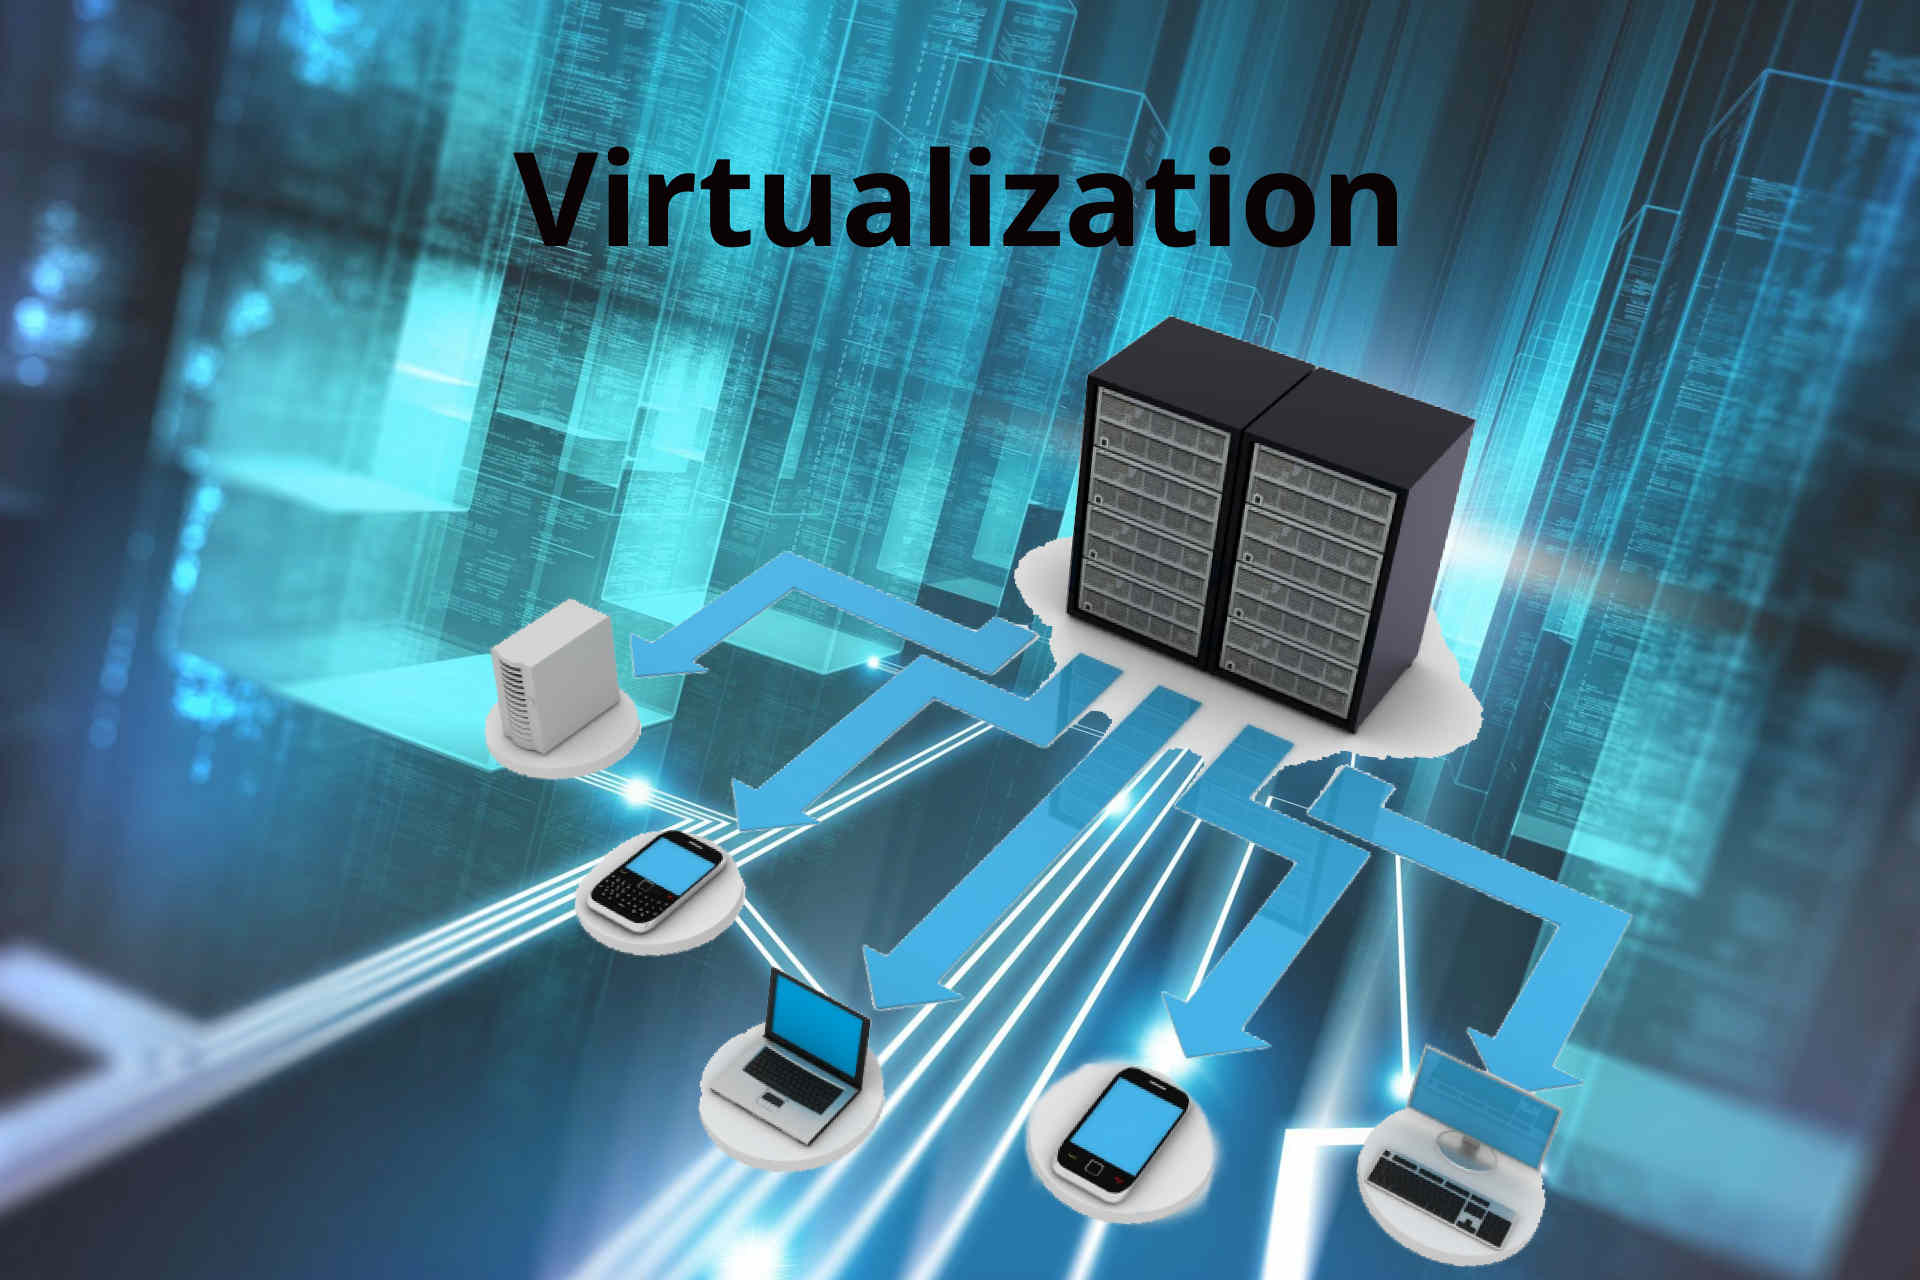 virtualization software for windows 10 home